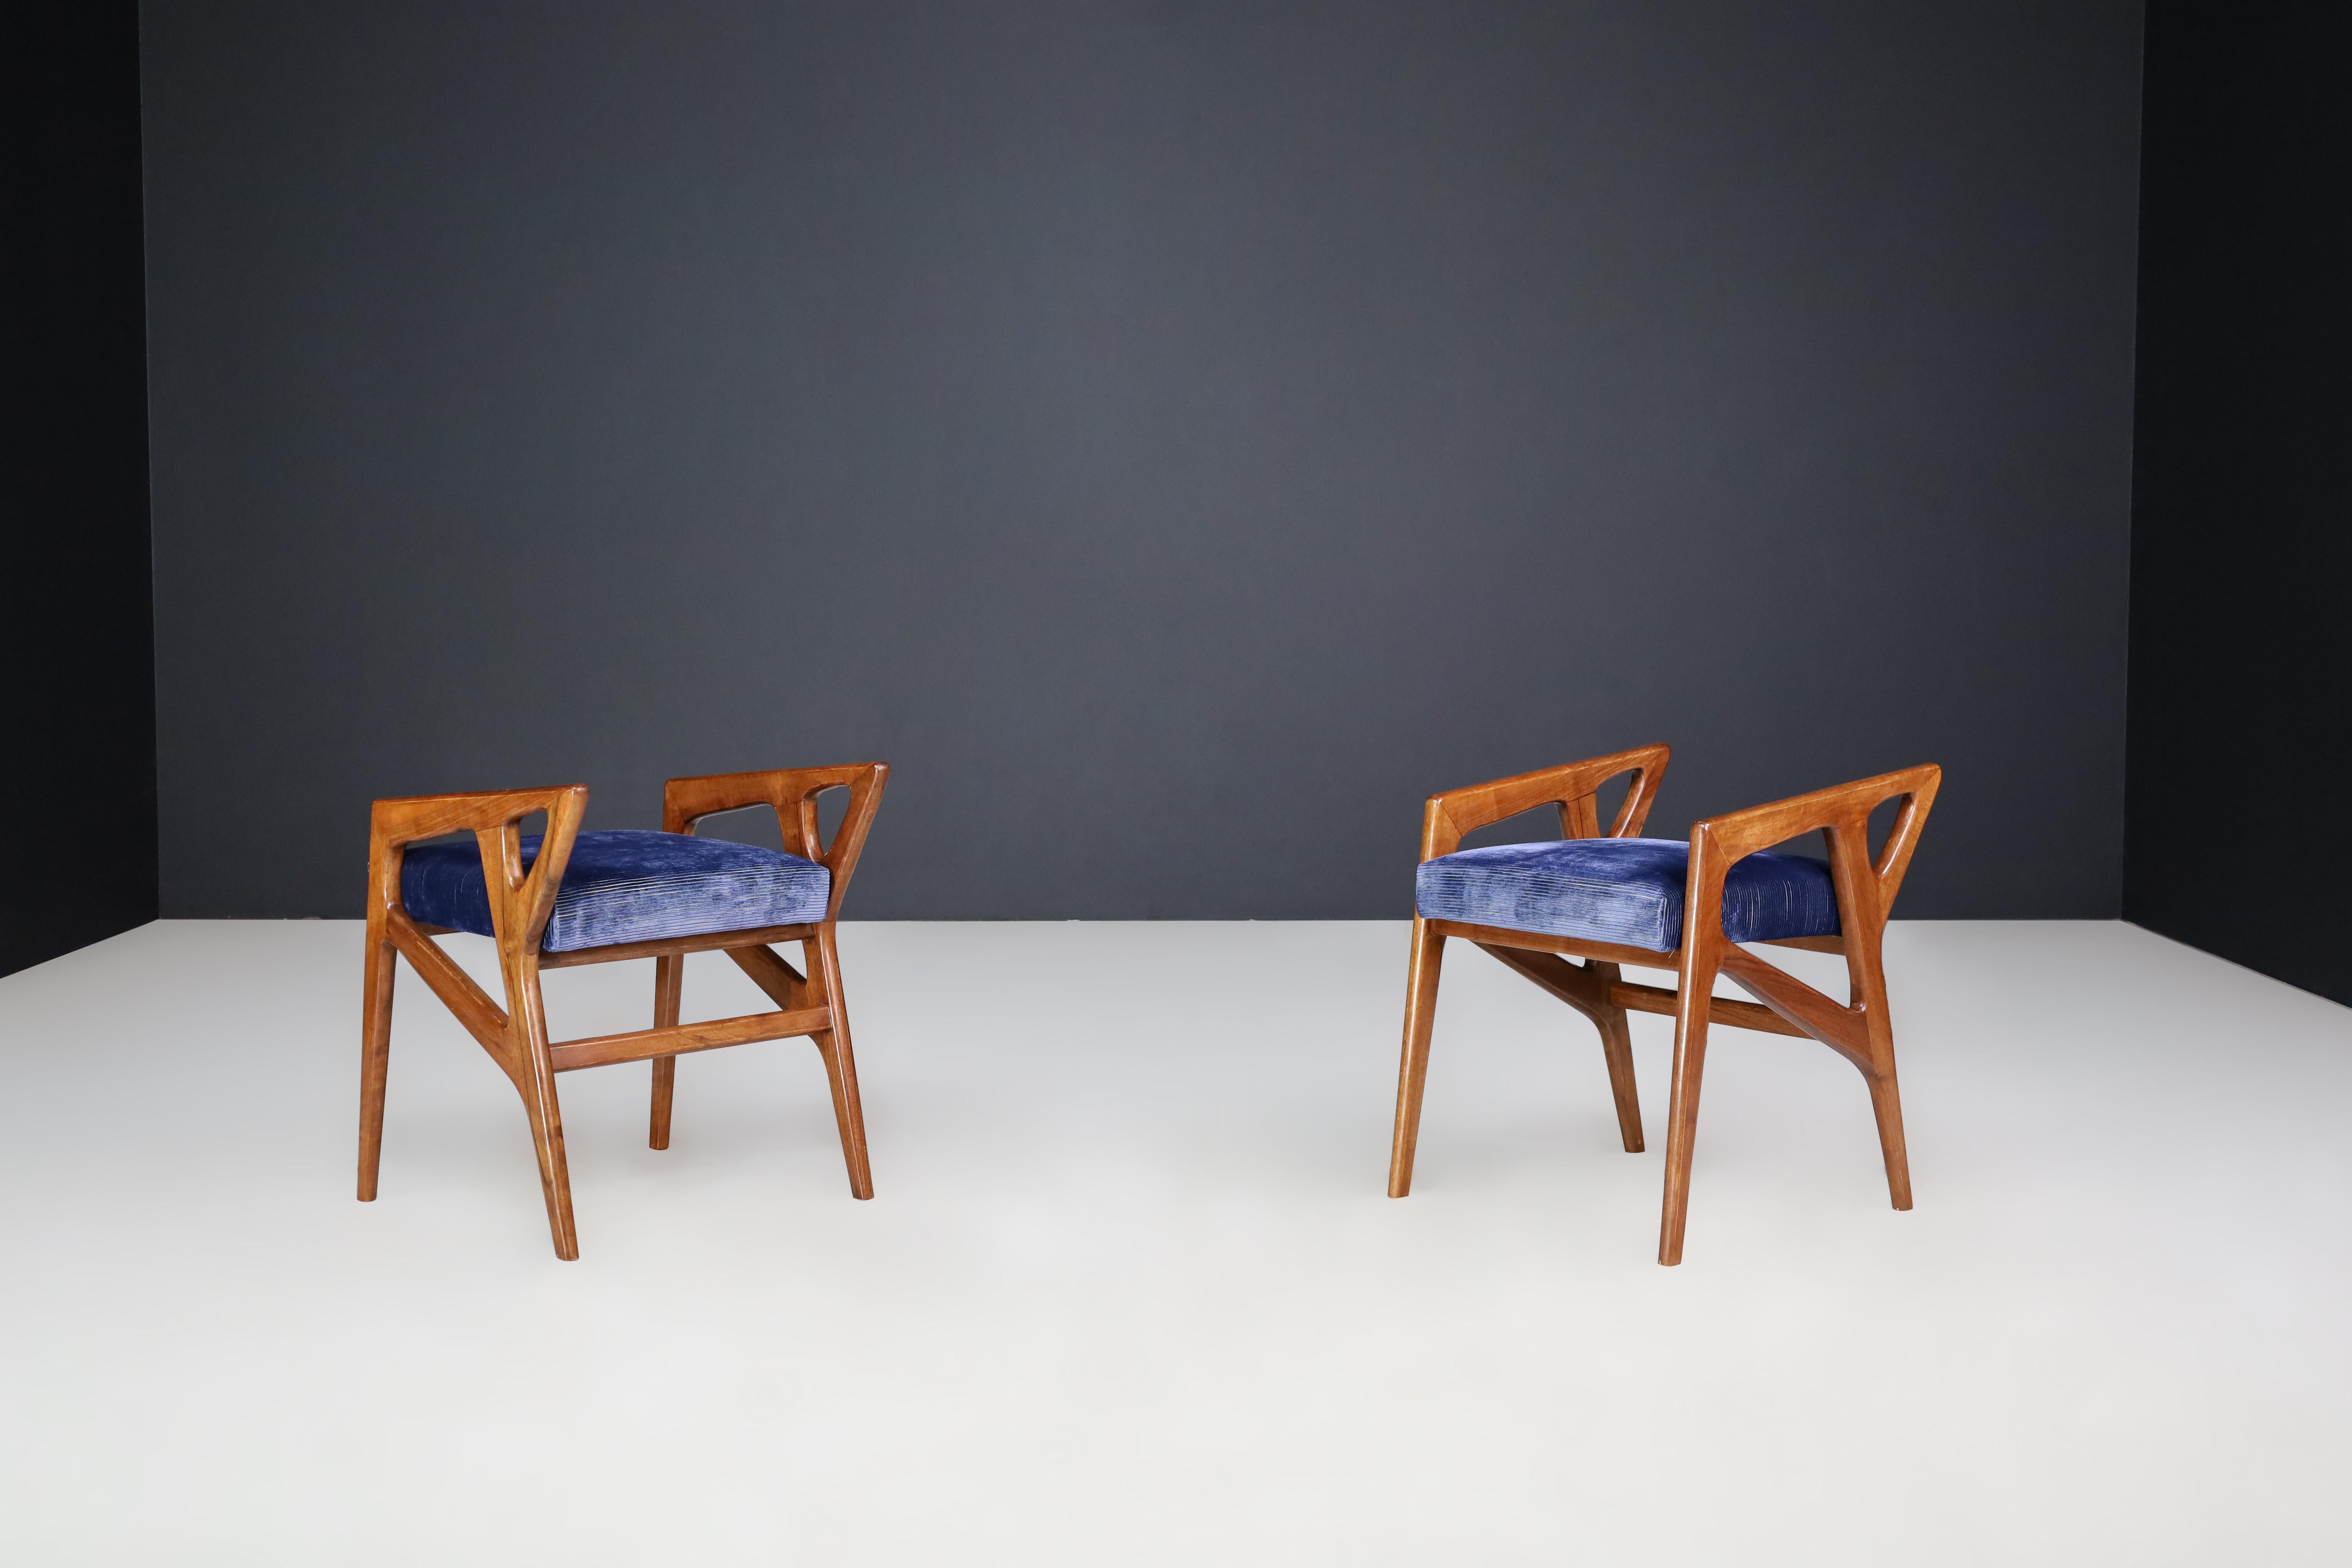 Upholstery Gio Ponti for Cassina Sculptural Stools in Walnut, Italy, 1950s.   For Sale